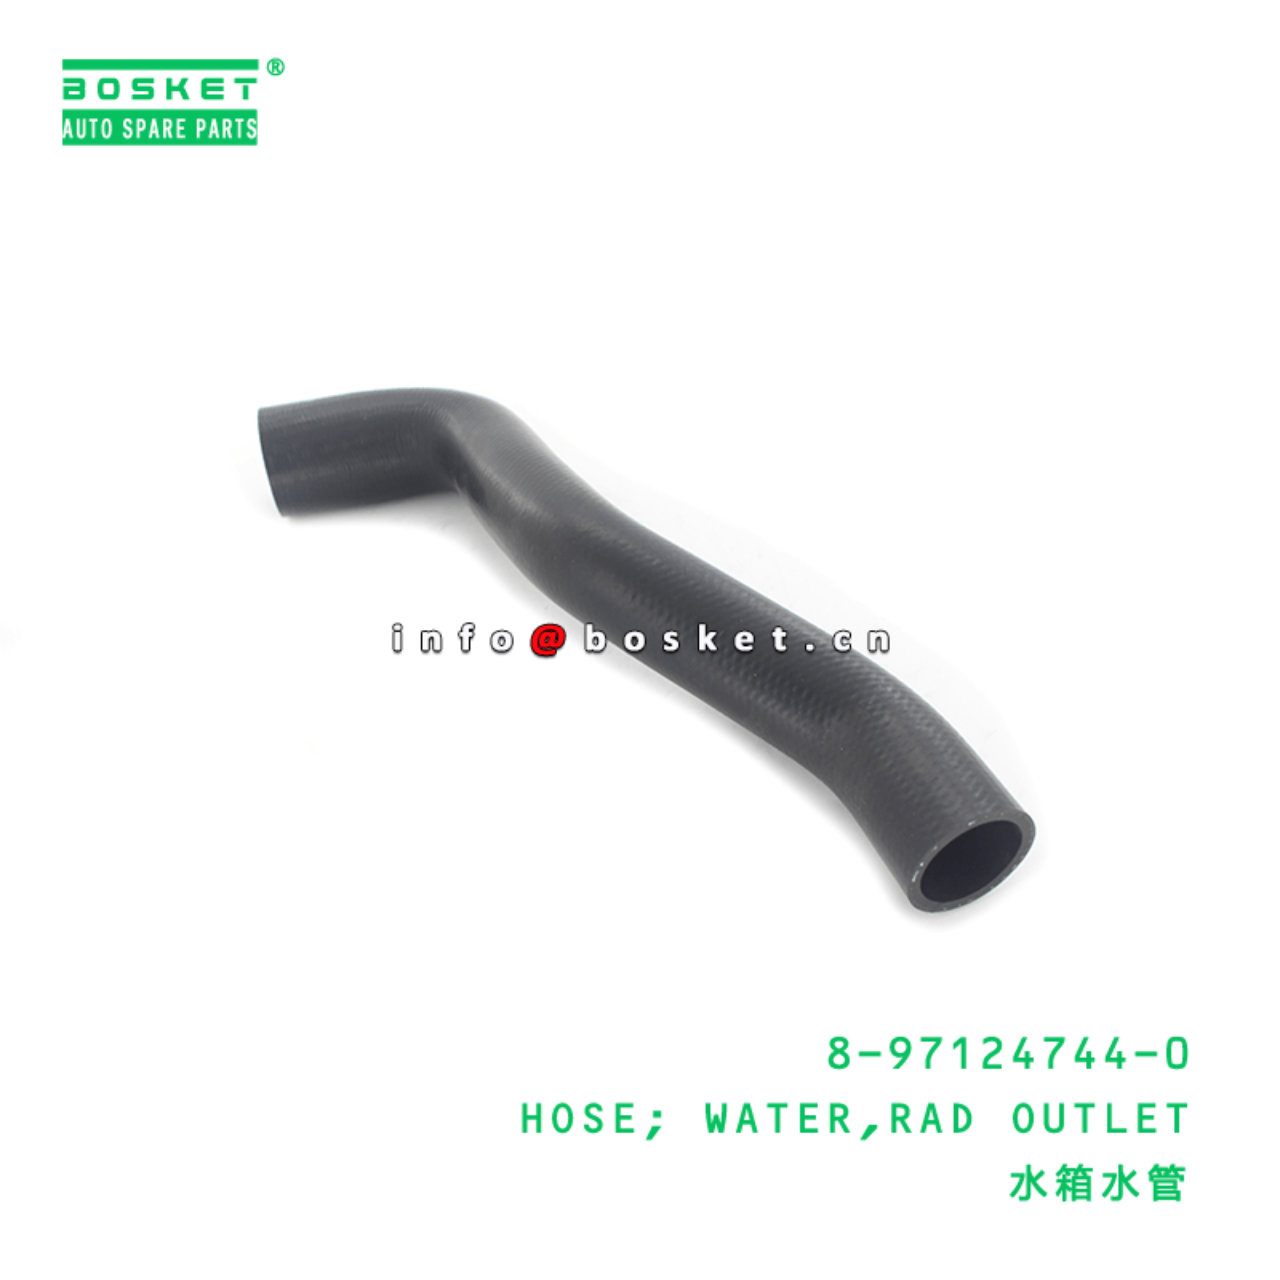 8-97124744-0 Rad Outlet Water Hose 8971247440 Suitable for ISUZU NKR